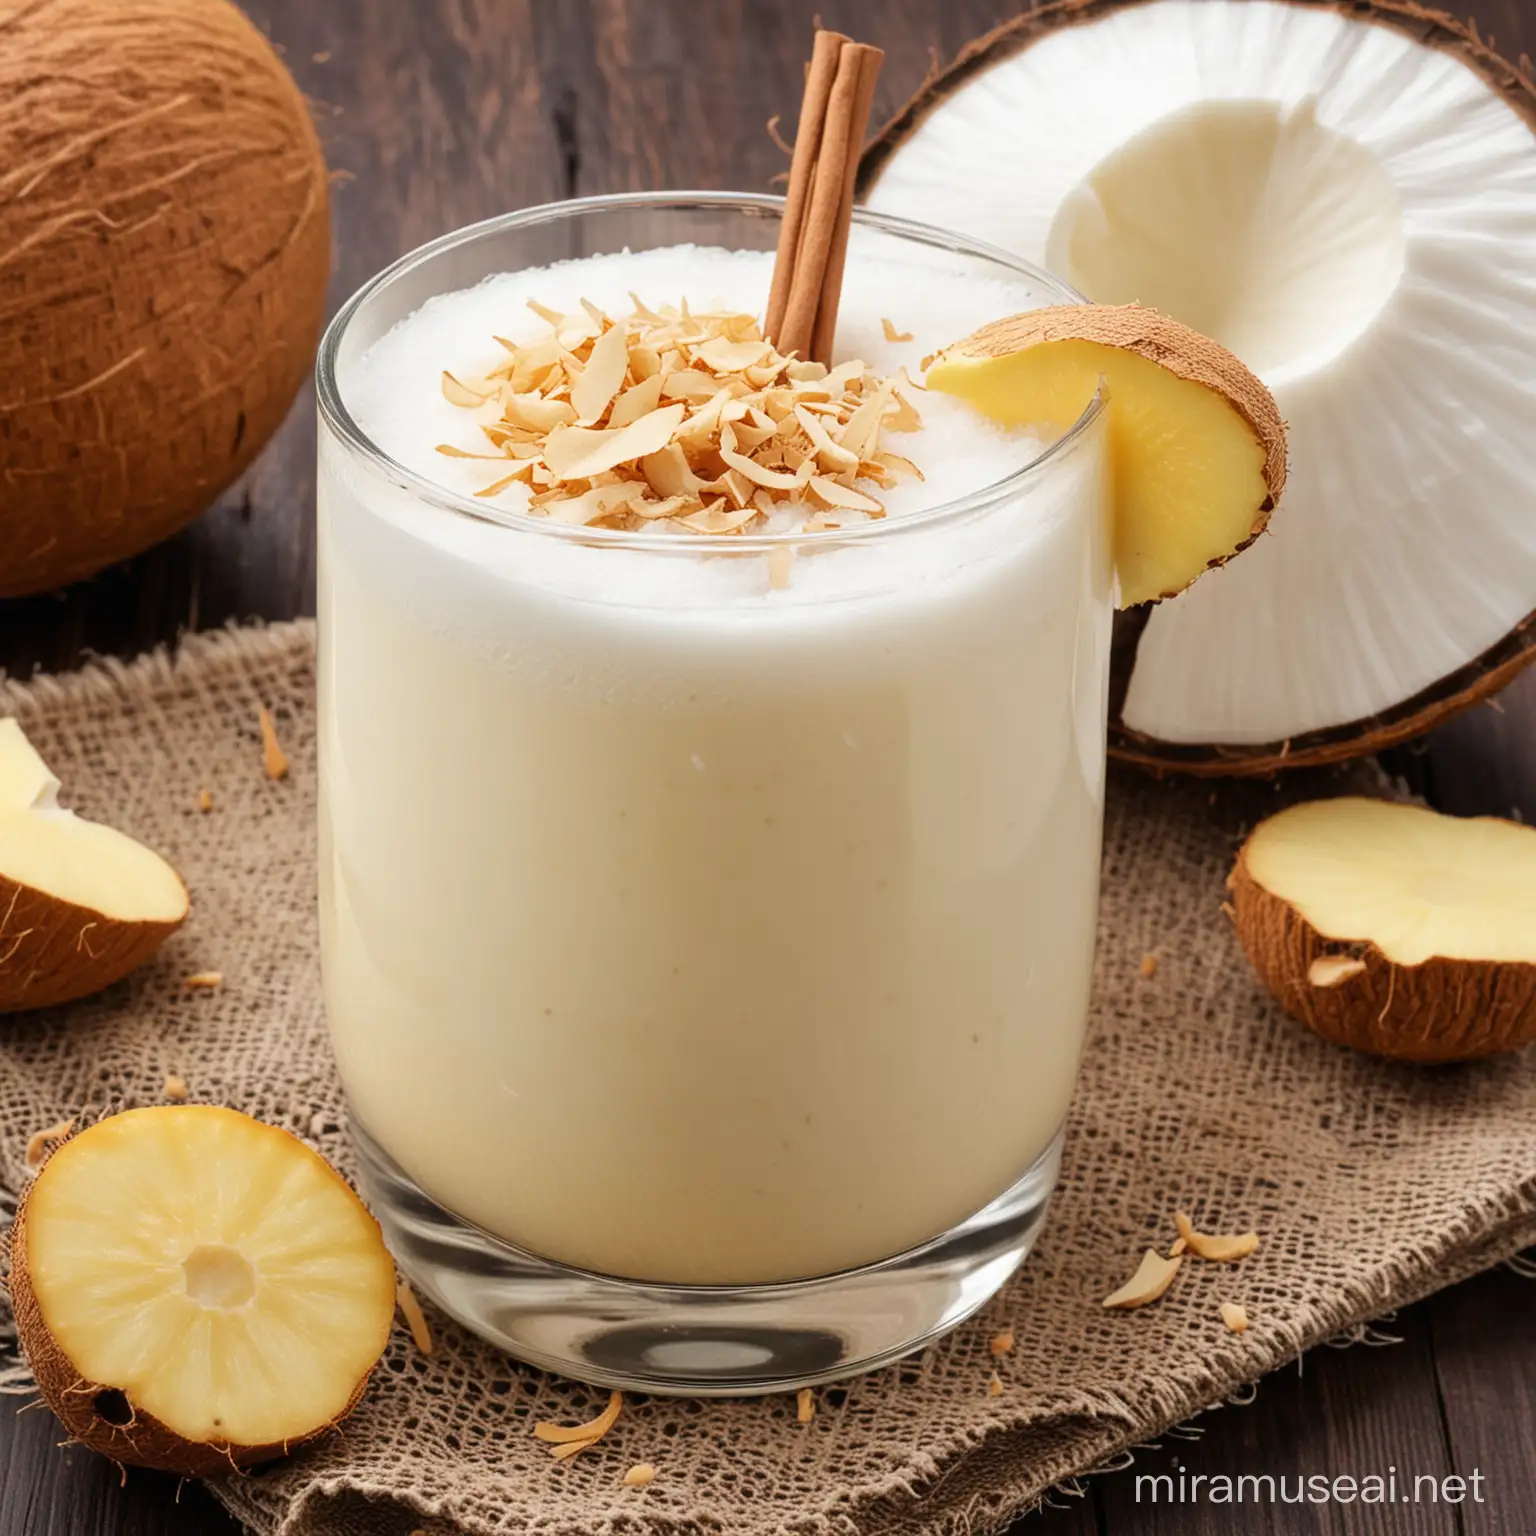 Recipe of coconut and ginger 
